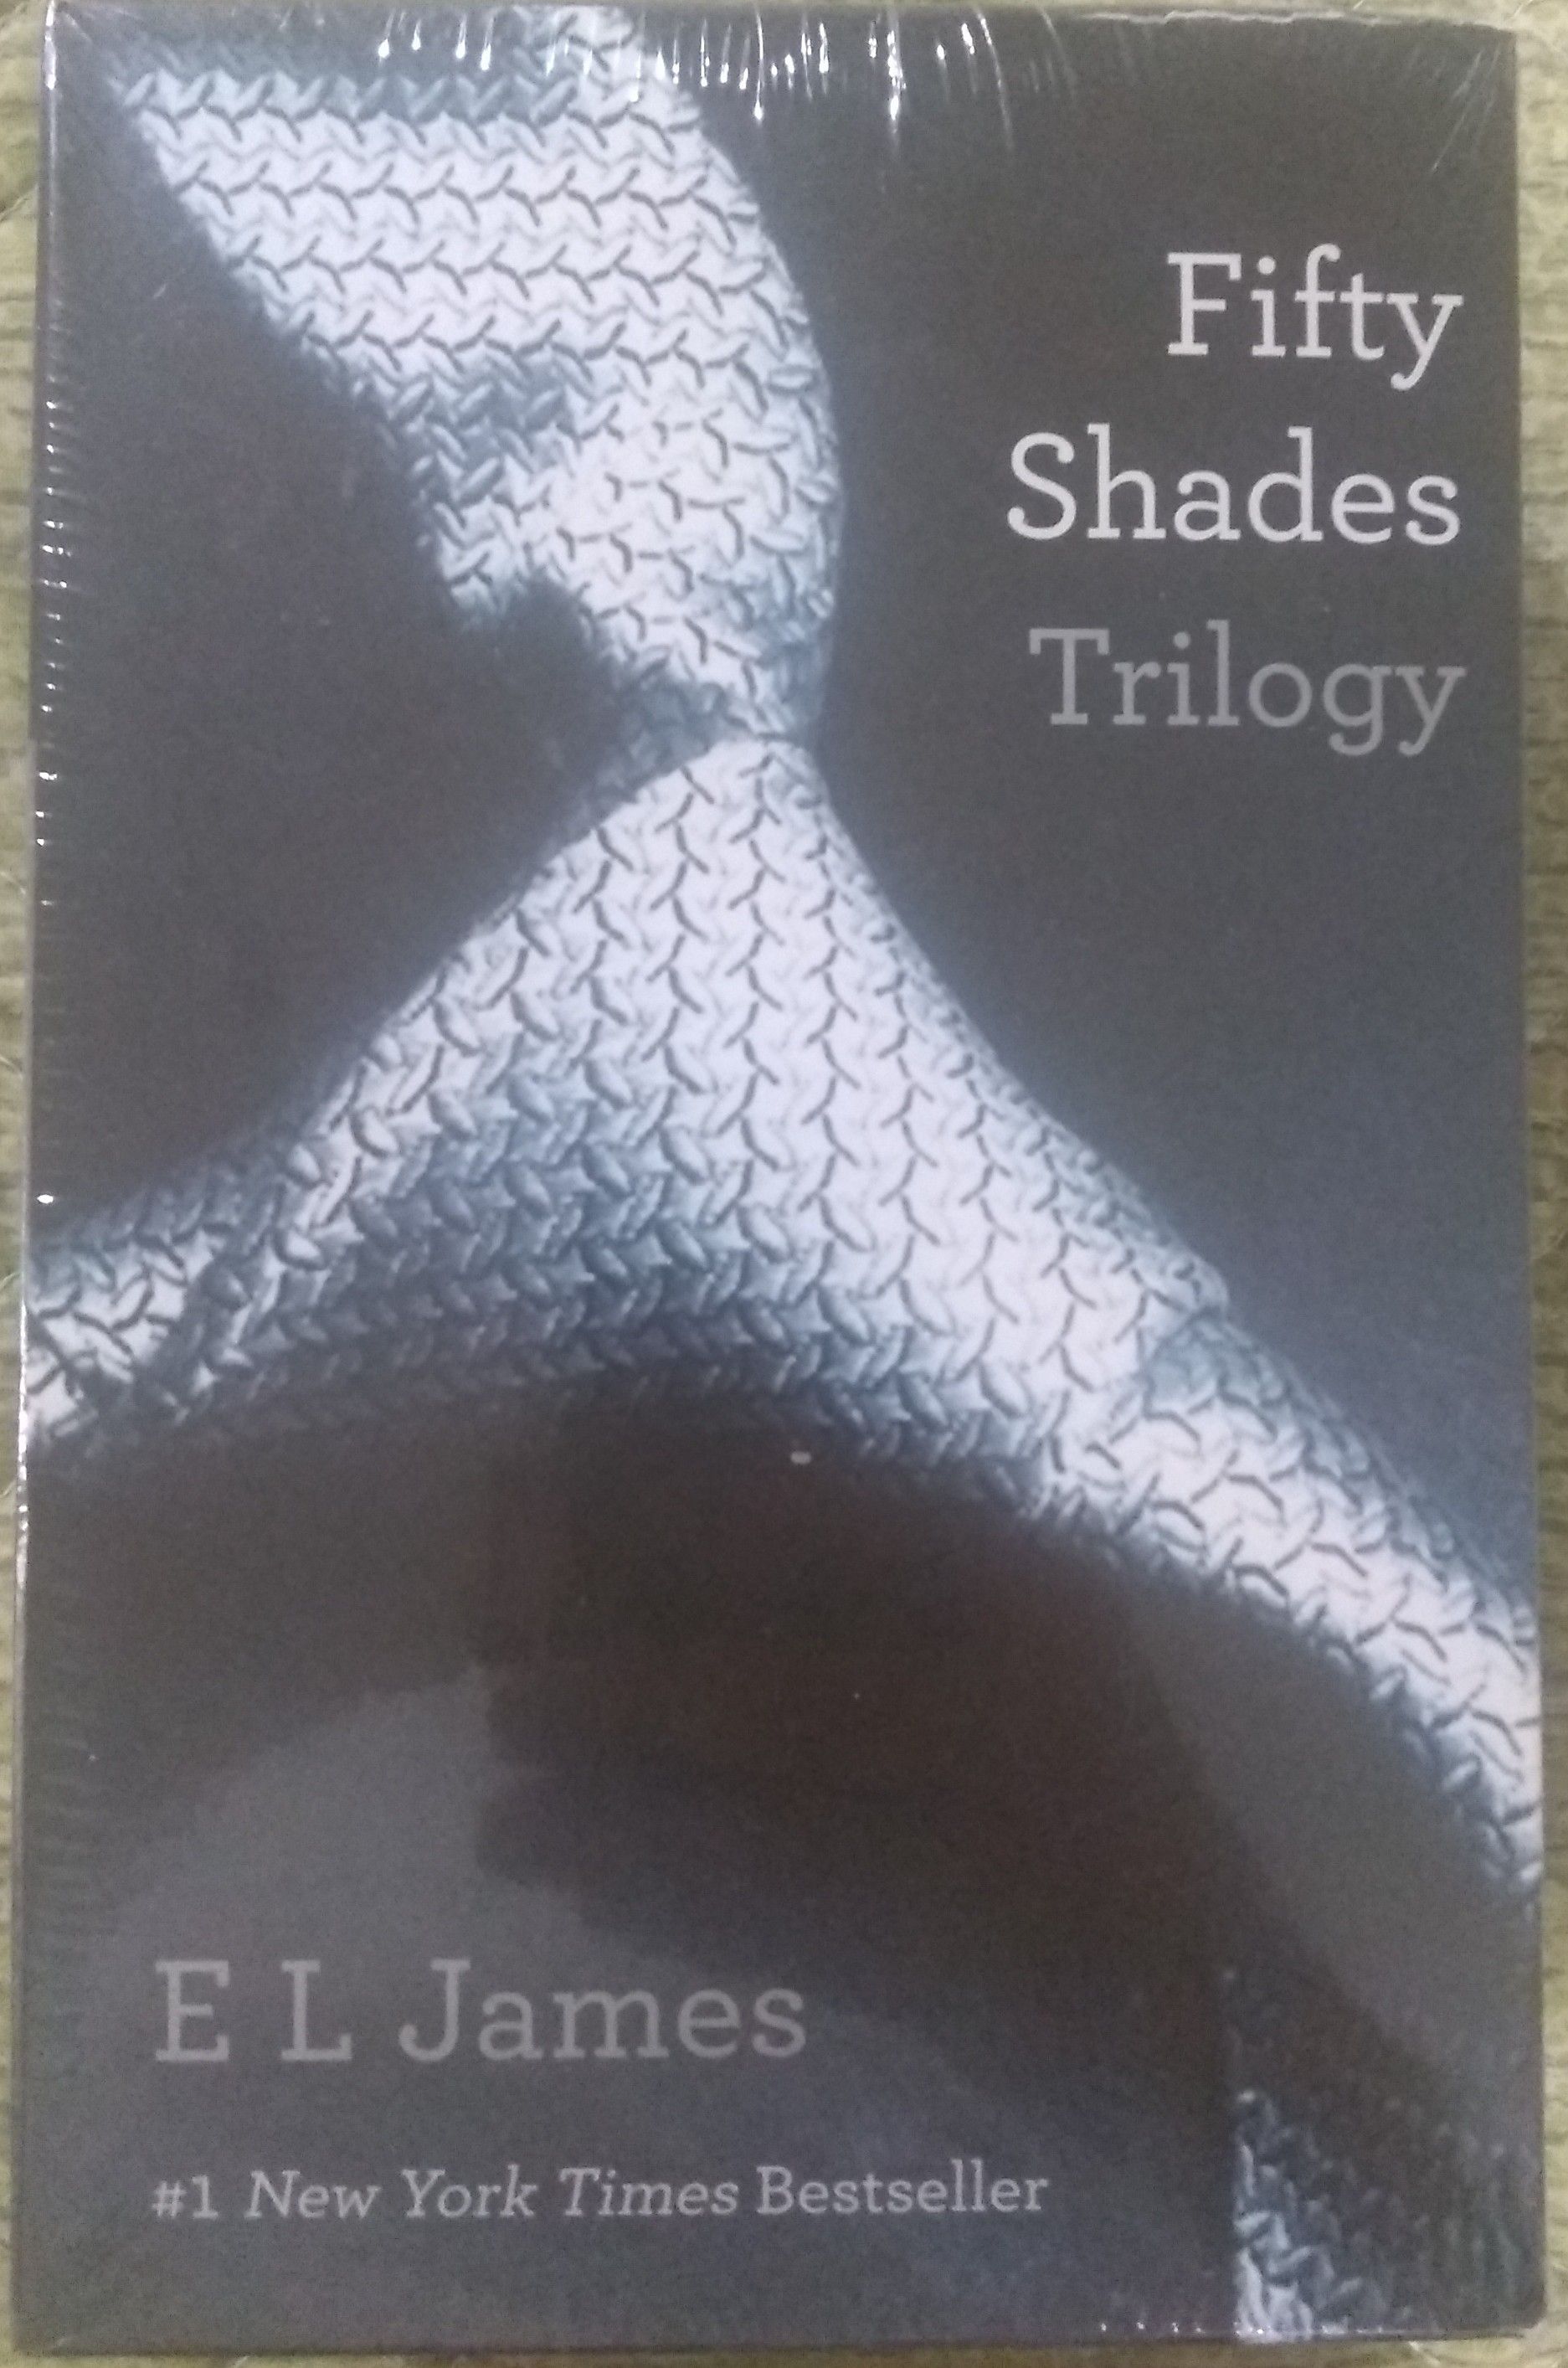 Fifty shades trilogy